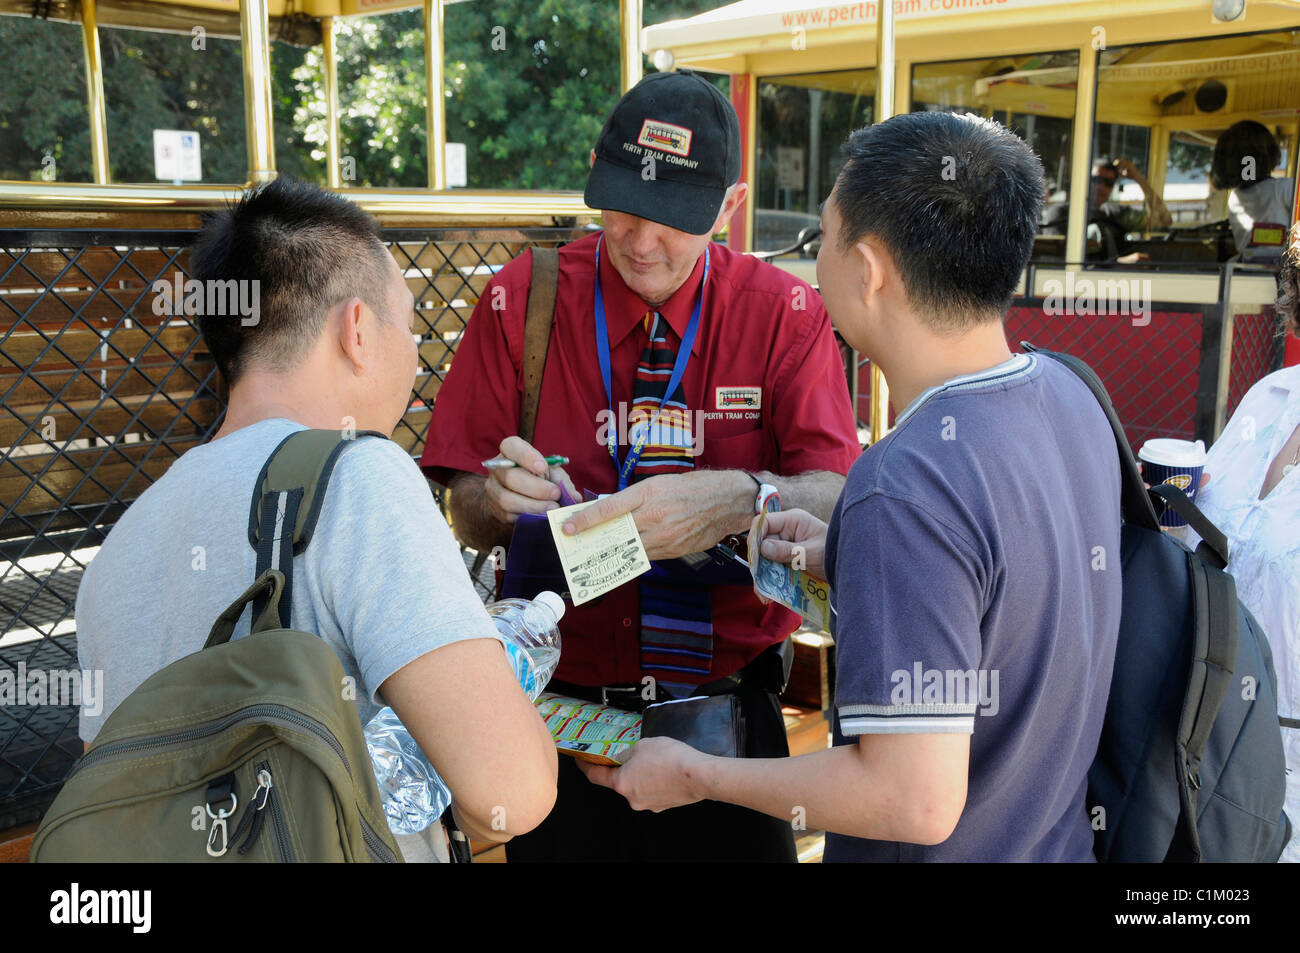 A tram ticket conductor issuing tram tickets to two tourists in Perth, Western Australia Stock Photo